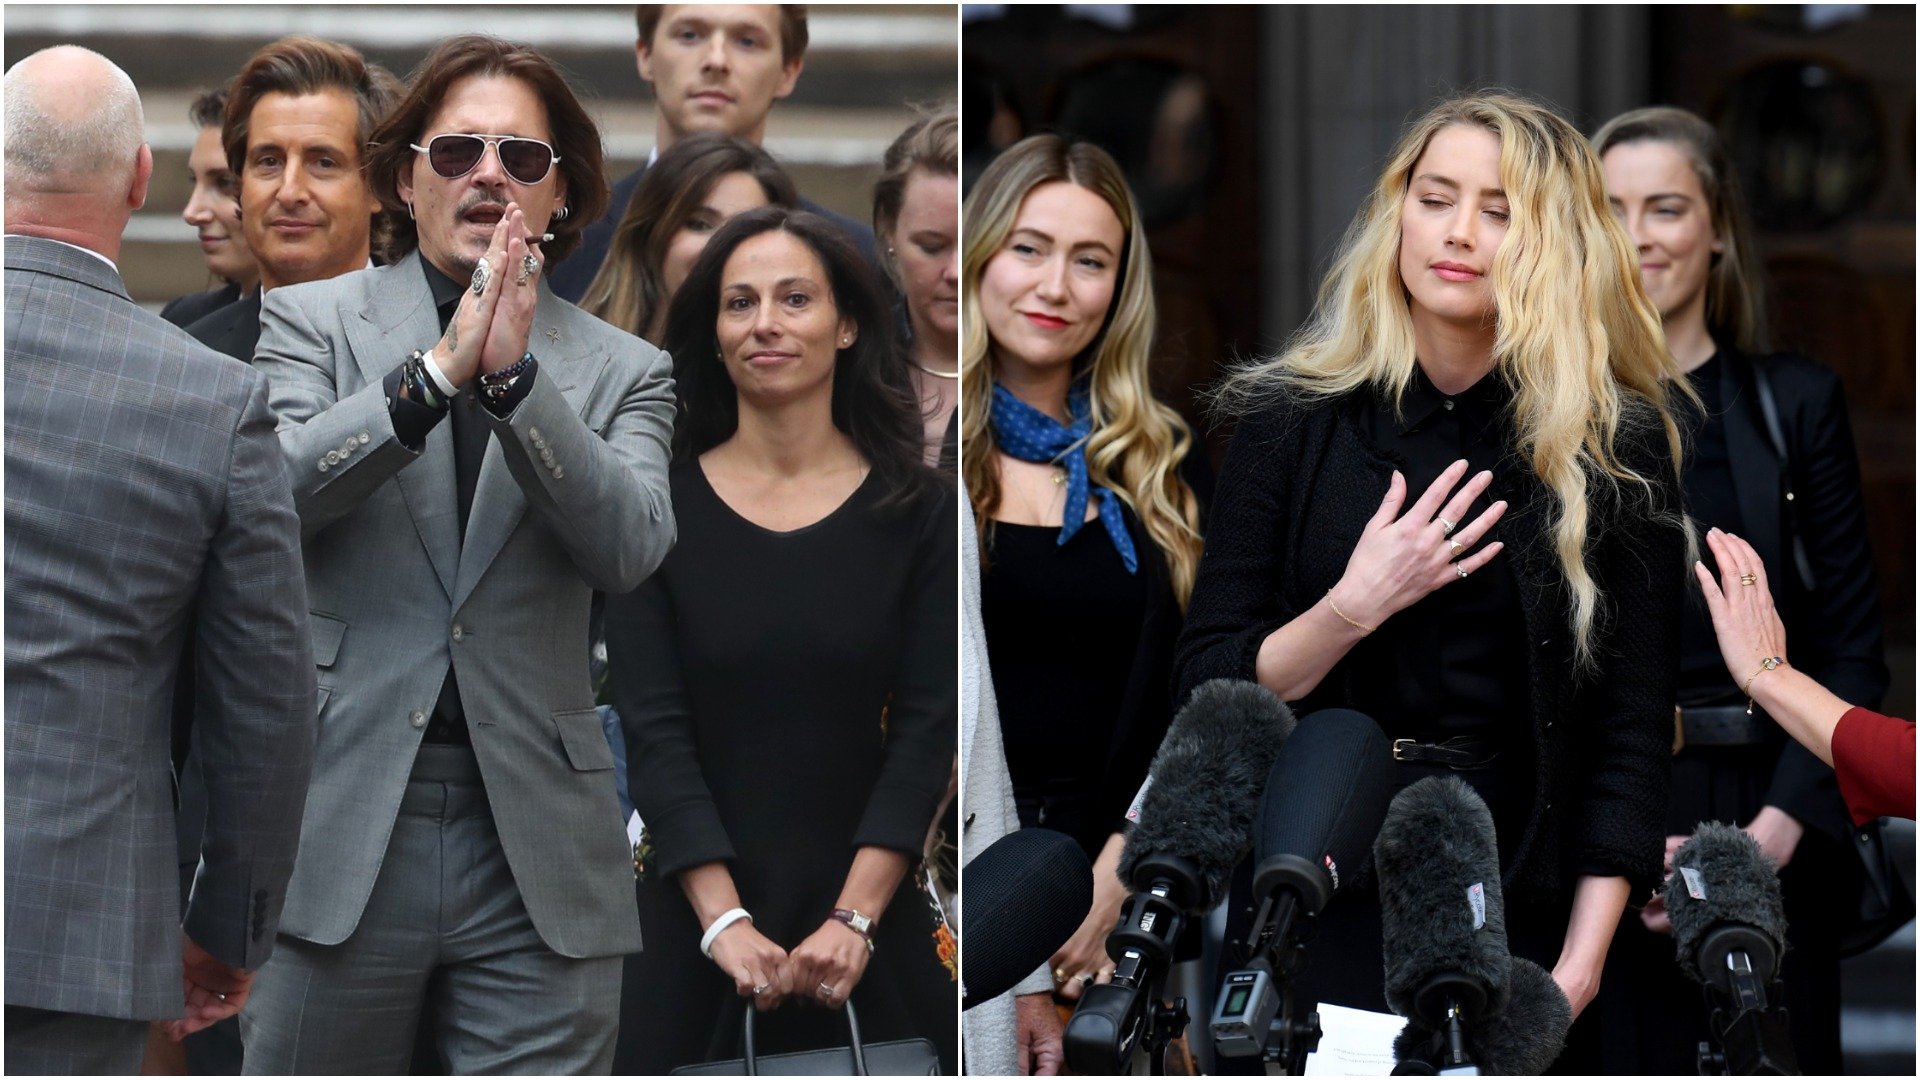 Johnny Depp thanks fans outside of a London courtroom. Amber Heard stands in front of microphones and puts her hand over her heart